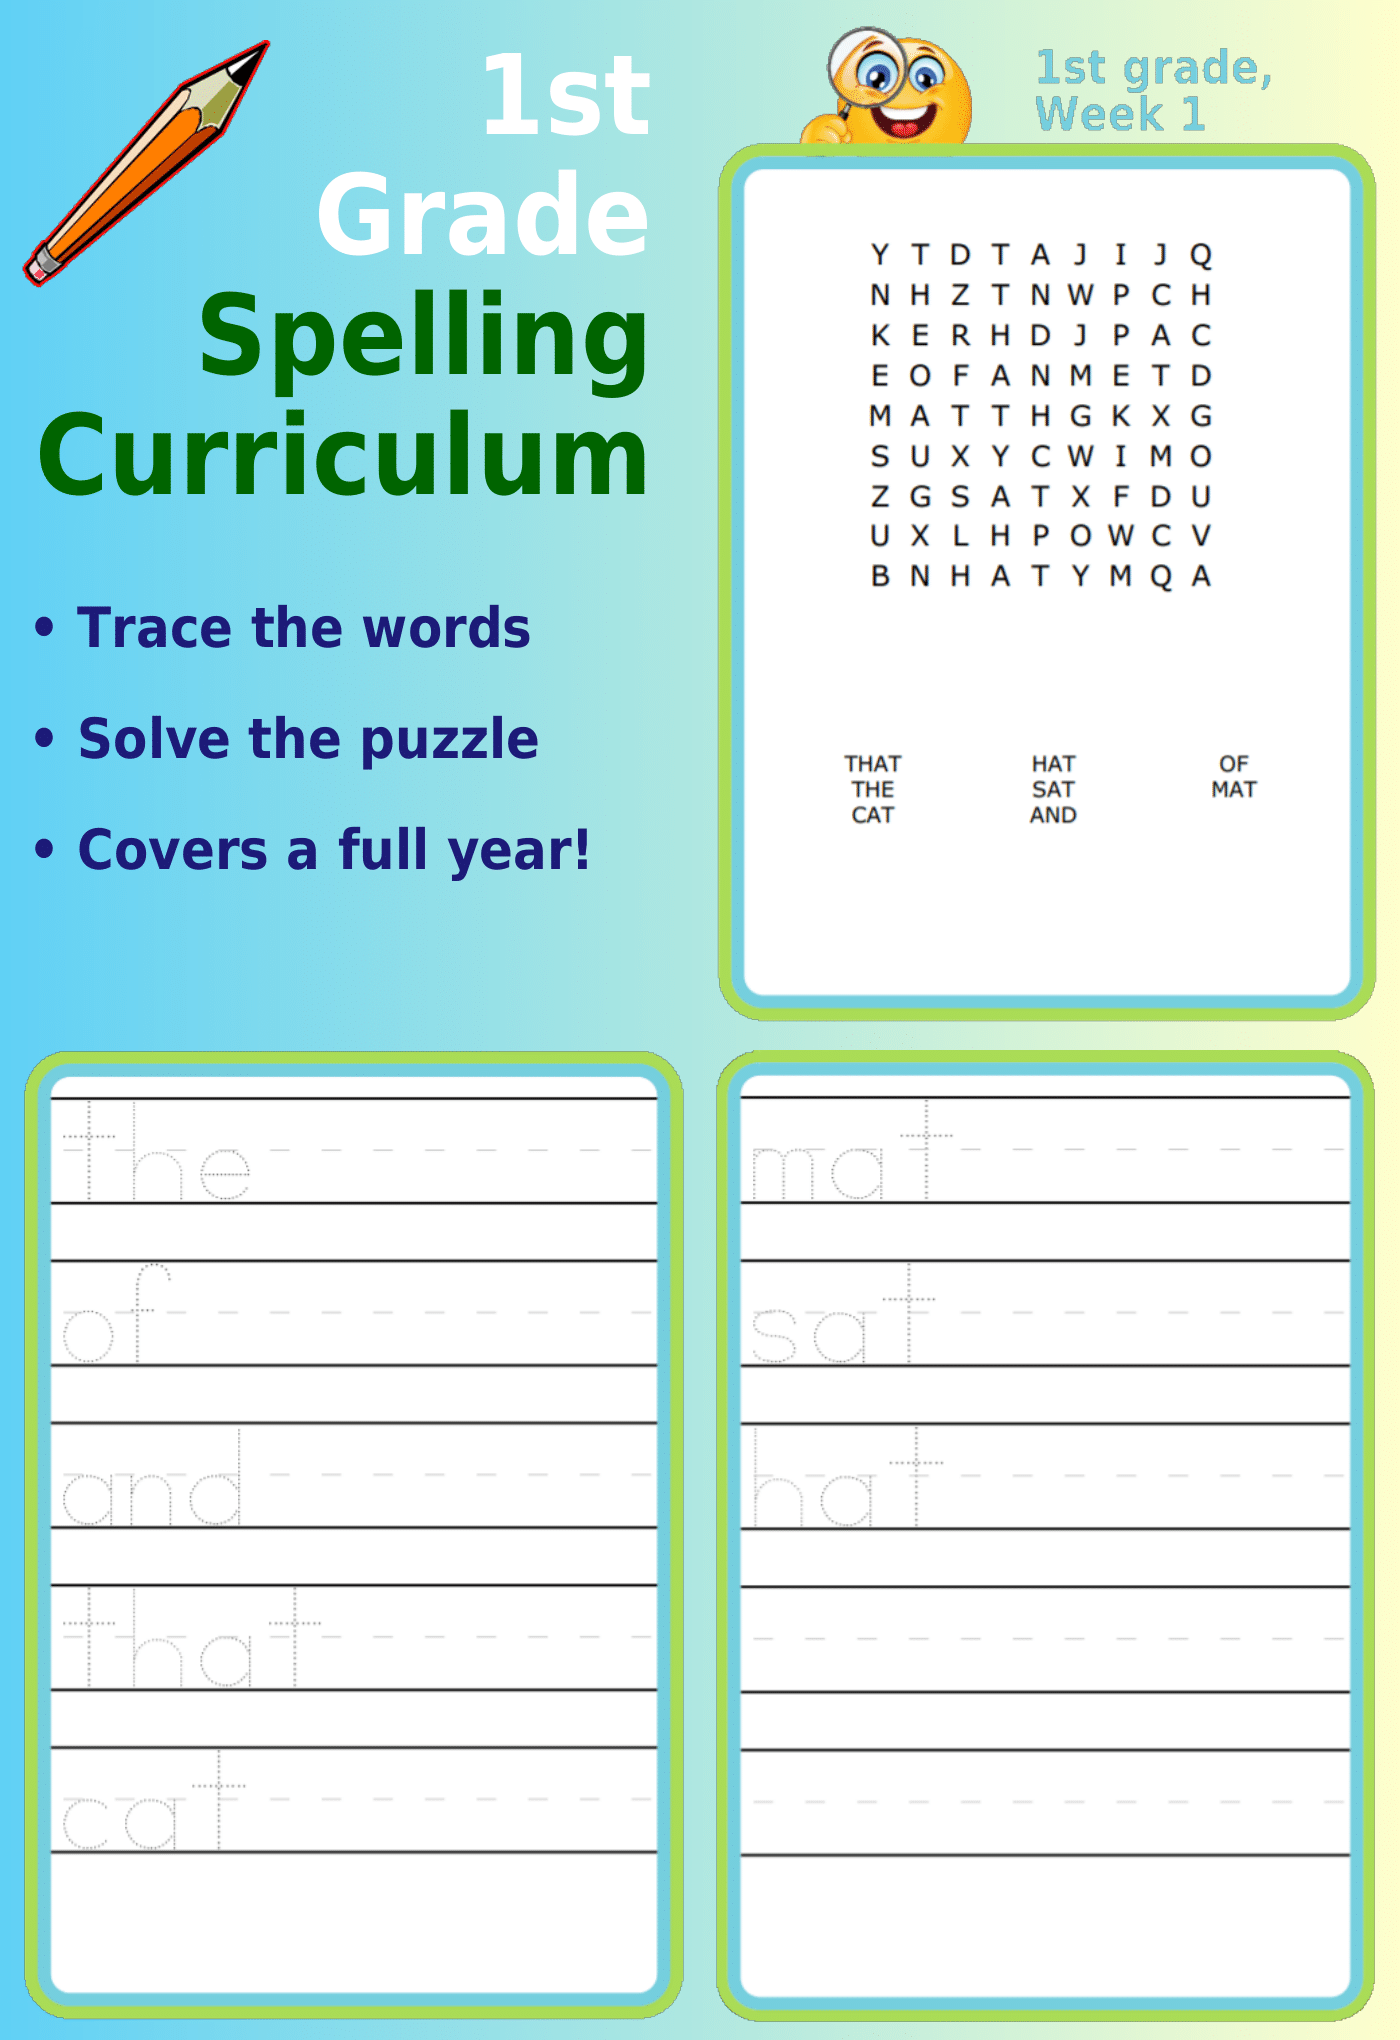 1st Grade Spelling Curriculum: Word search and letter tracing